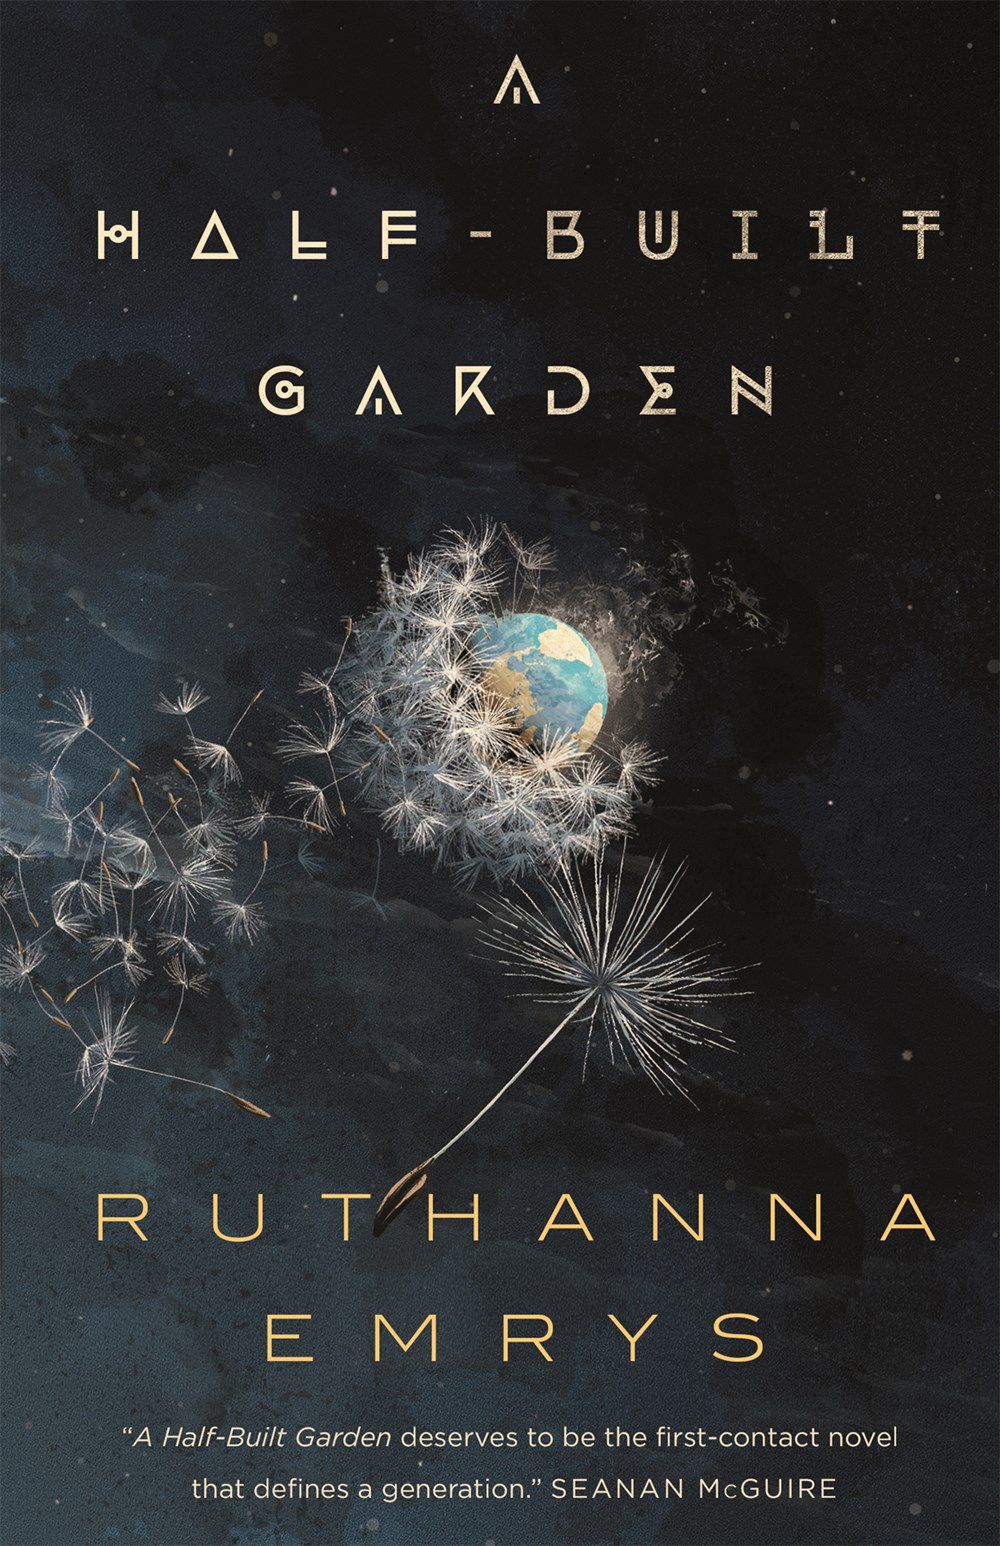 Cover image for A Half-Built Garden, which features the Earth at a distance surrounded by dandelion seedheads.